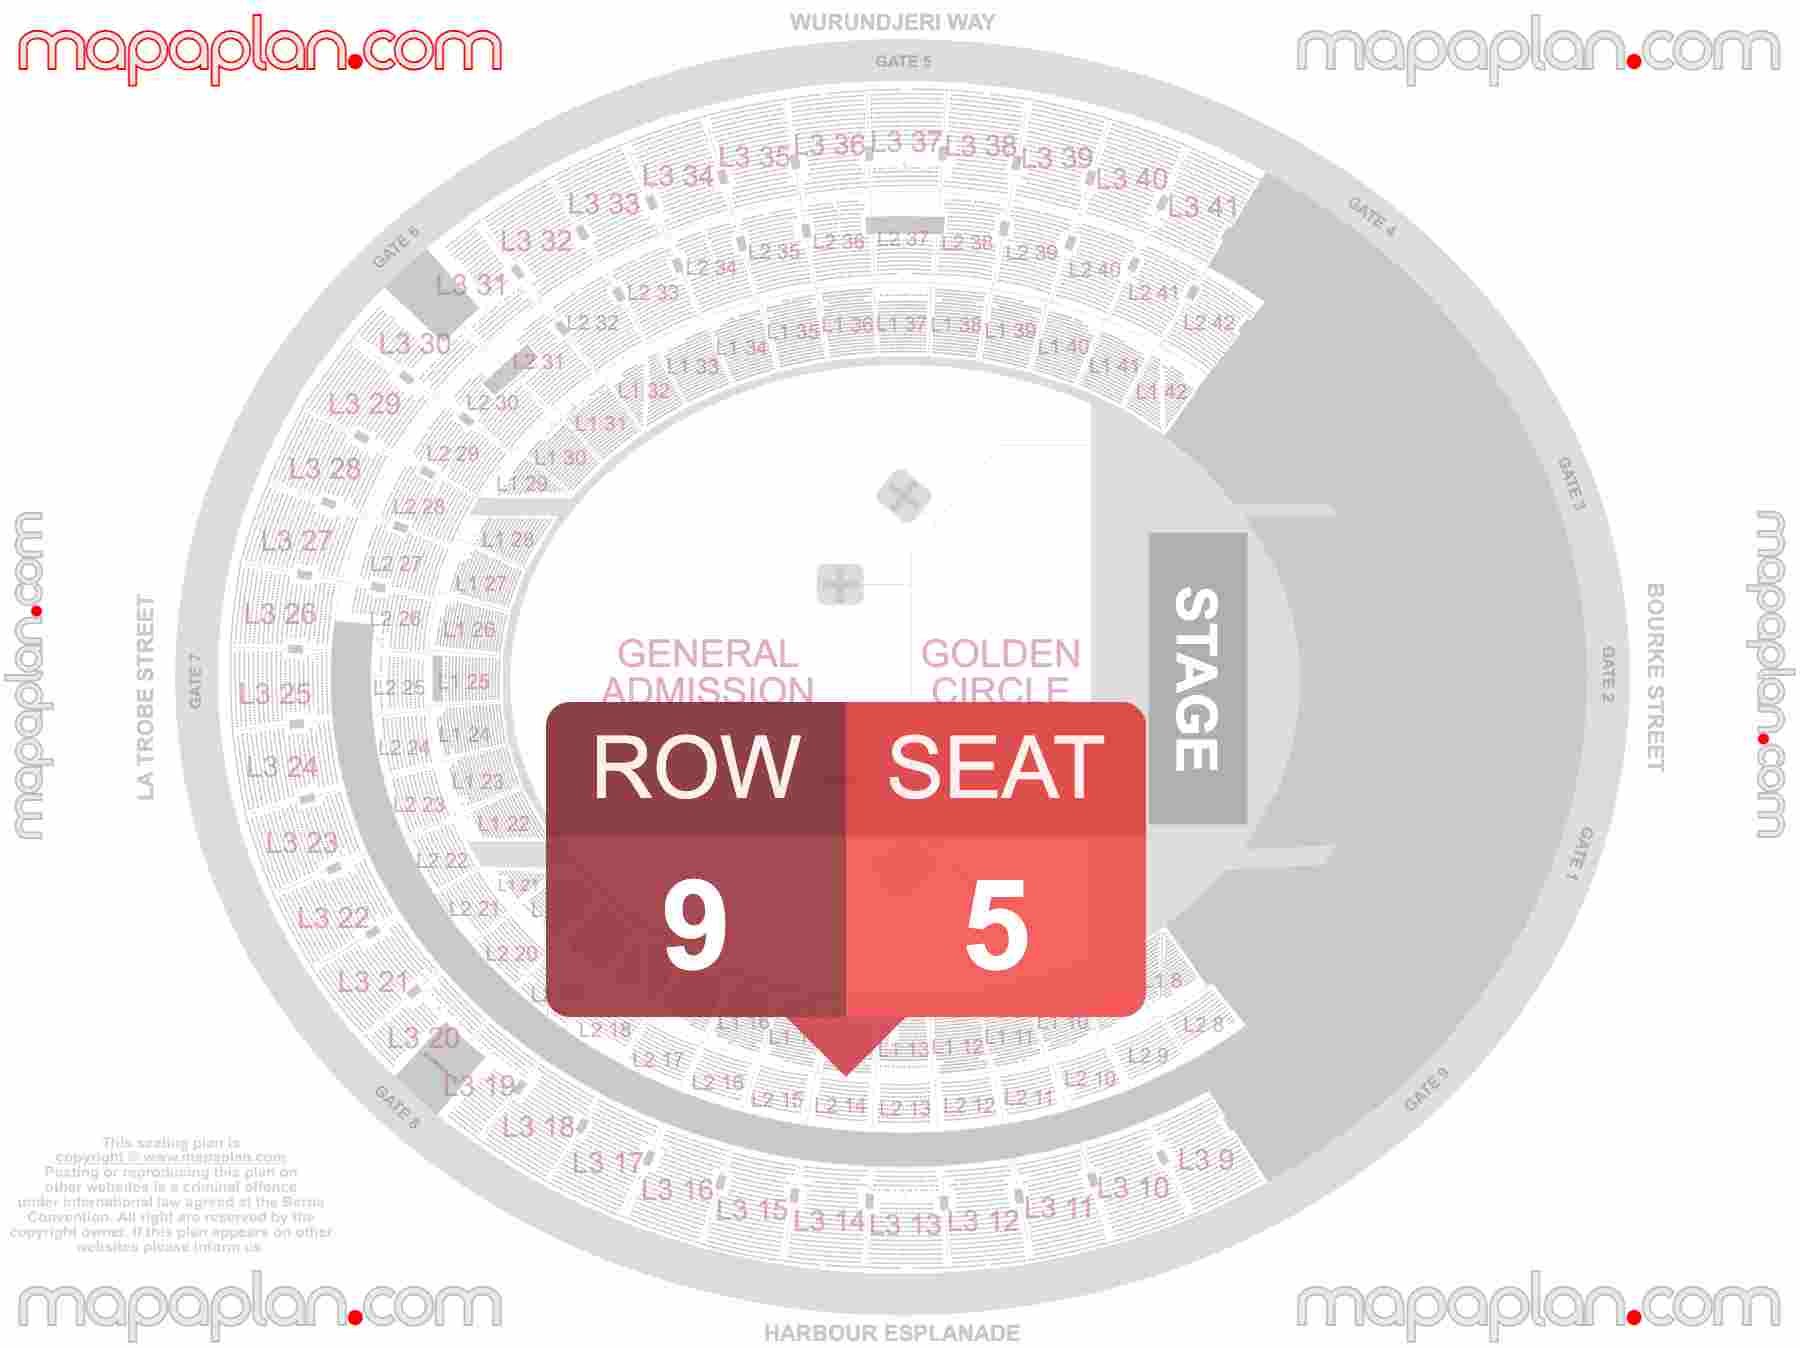 Melbourne Marvel Stadium seating map Concert with floor general admission standing inside capacity view arrangement plan - Interactive virtual 3d best seats & rows detailed stadium image configuration layout